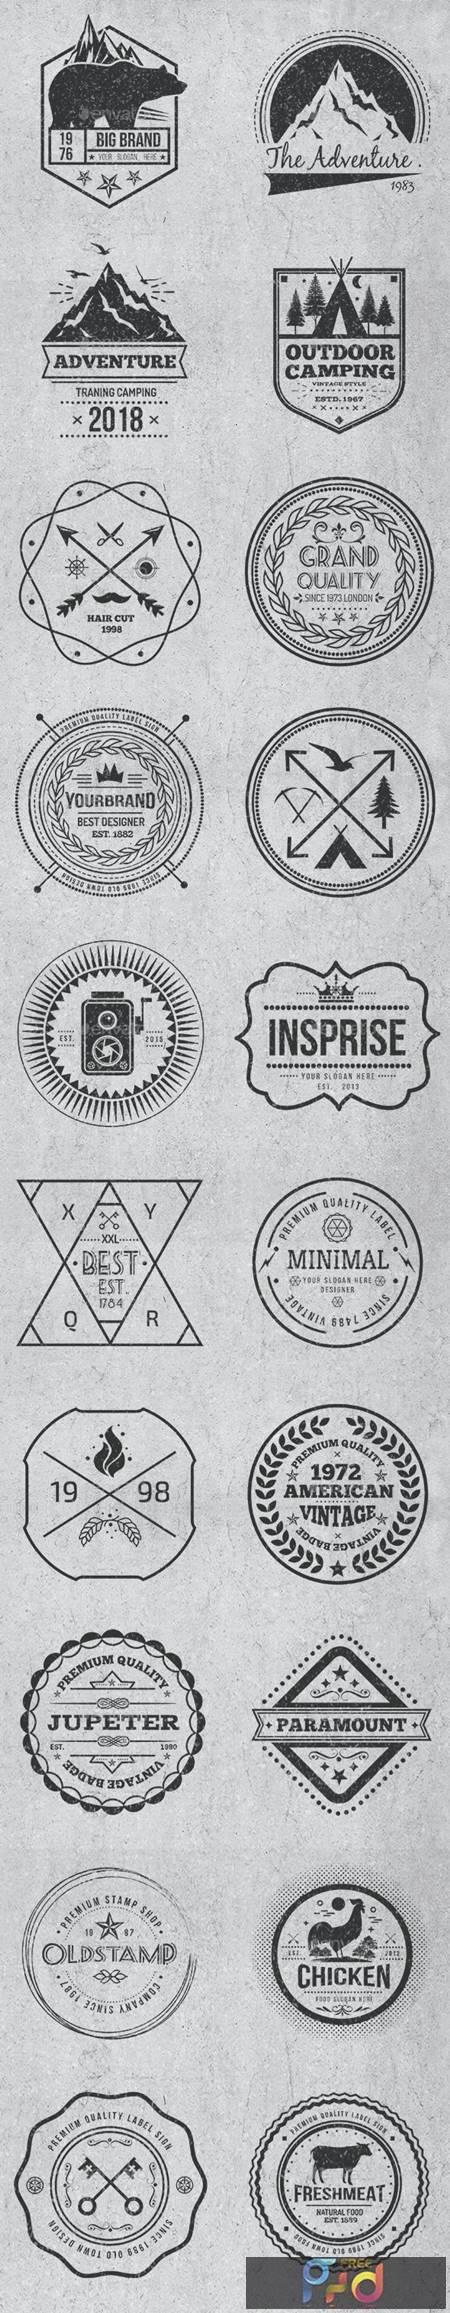 Vintage Style Badges and Logos Vol 4 17514983 1